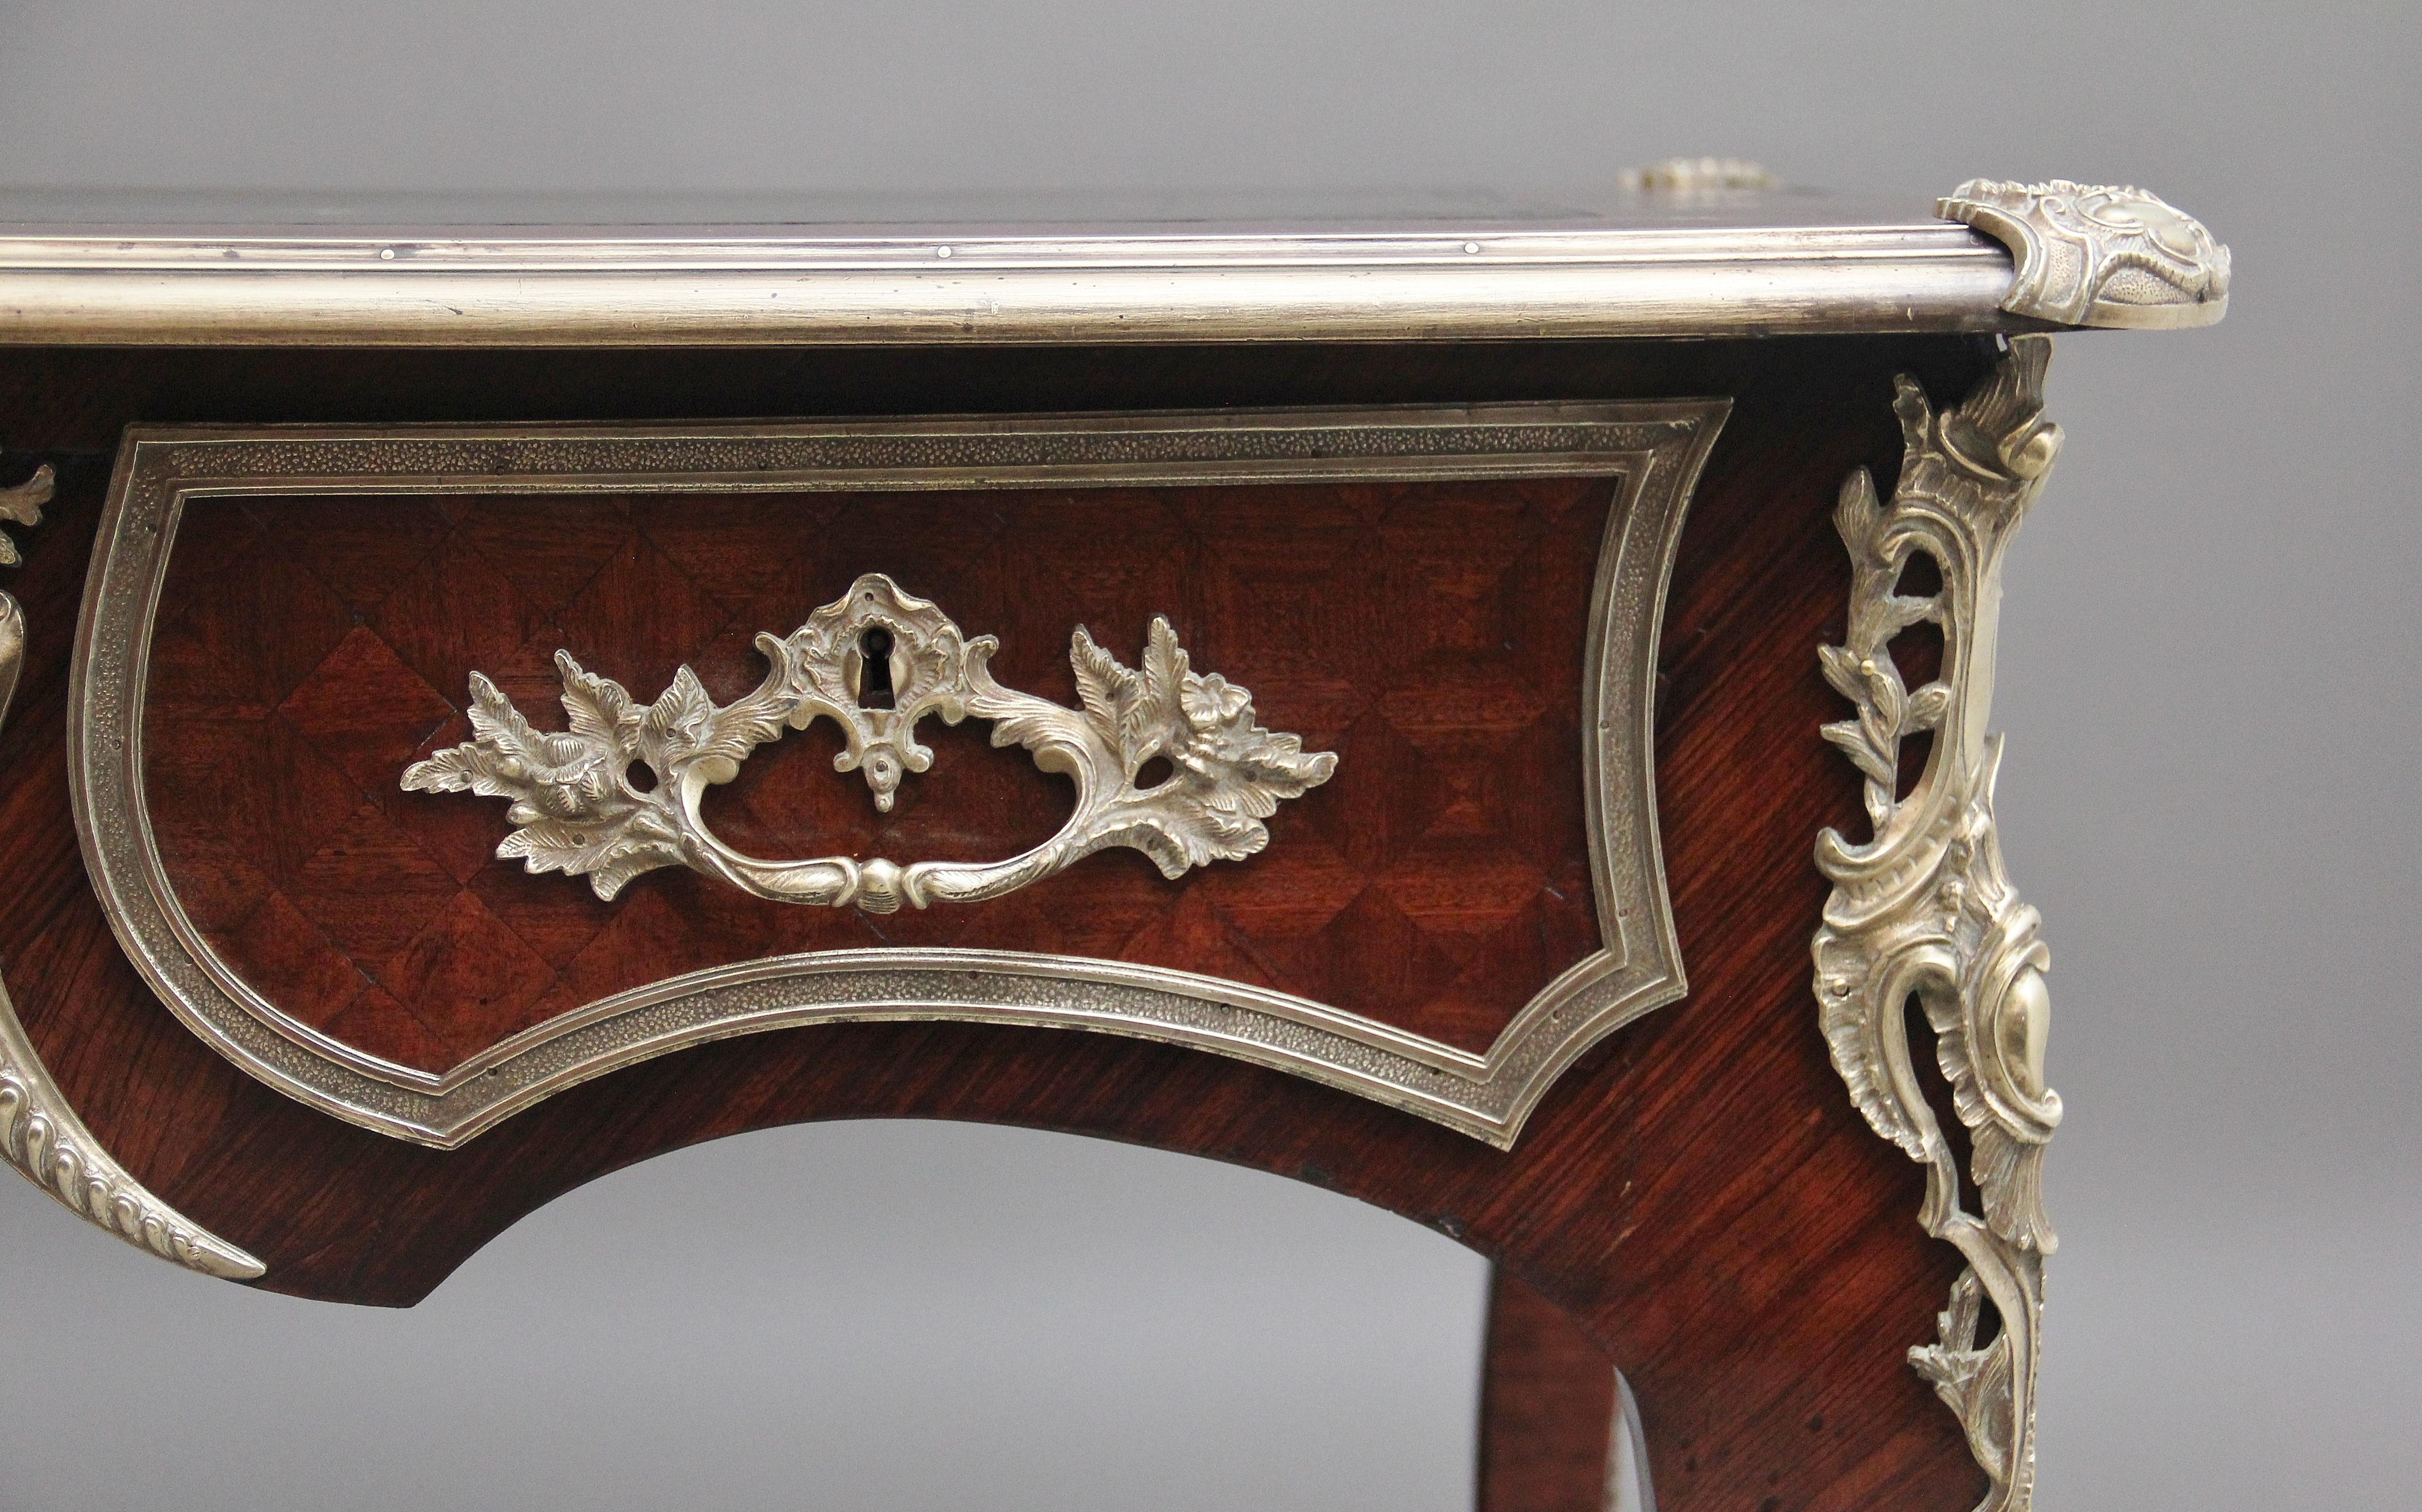 Mid-19th Century 19th Century French Kingwood Ormolu Mounted Desk For Sale